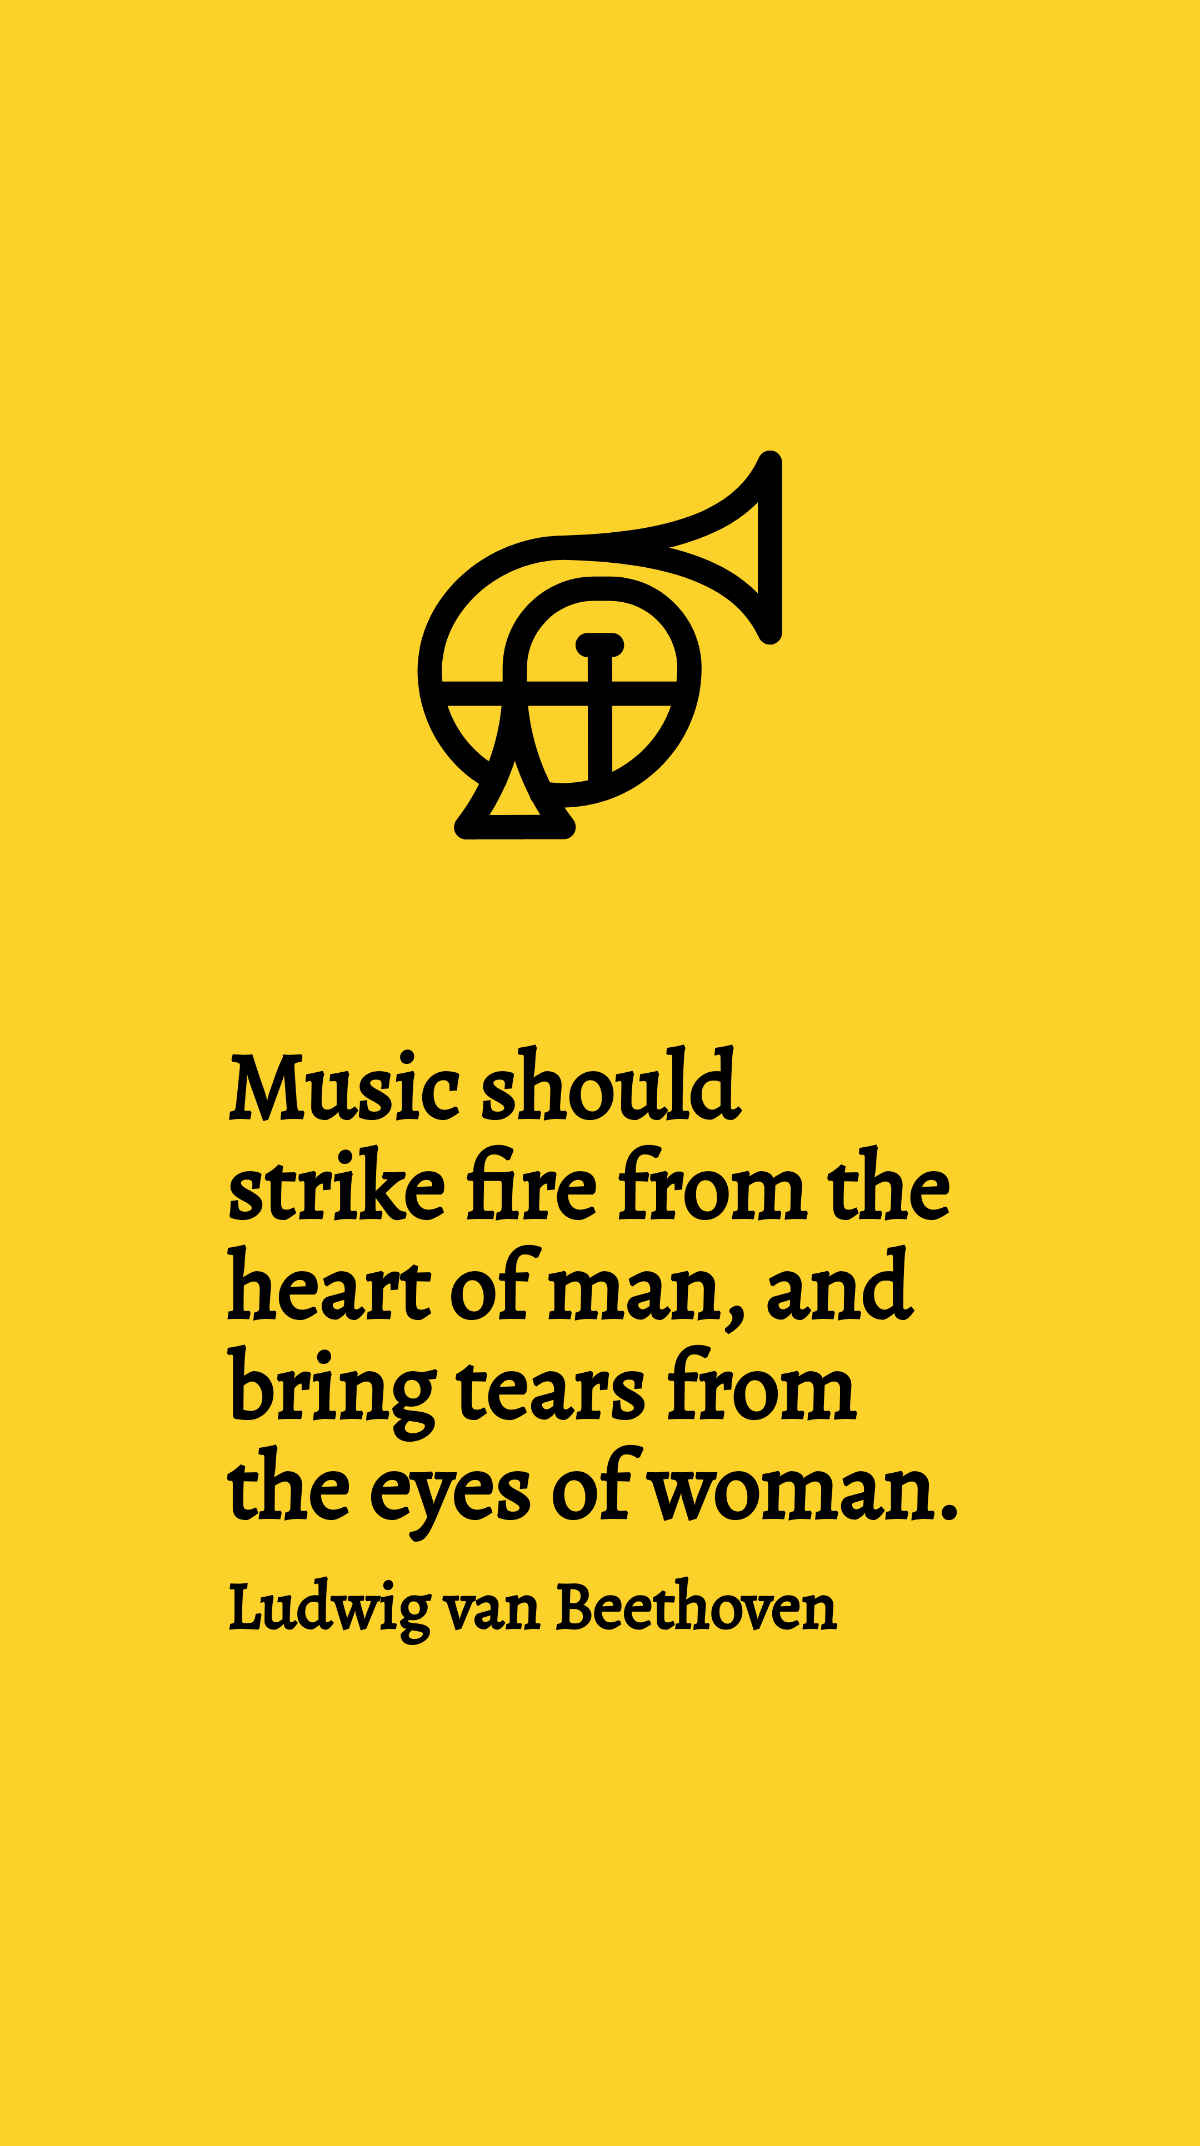 Ludwig van Beethoven - Music should strike fire from the heart of man, and bring tears from the eyes of woman.